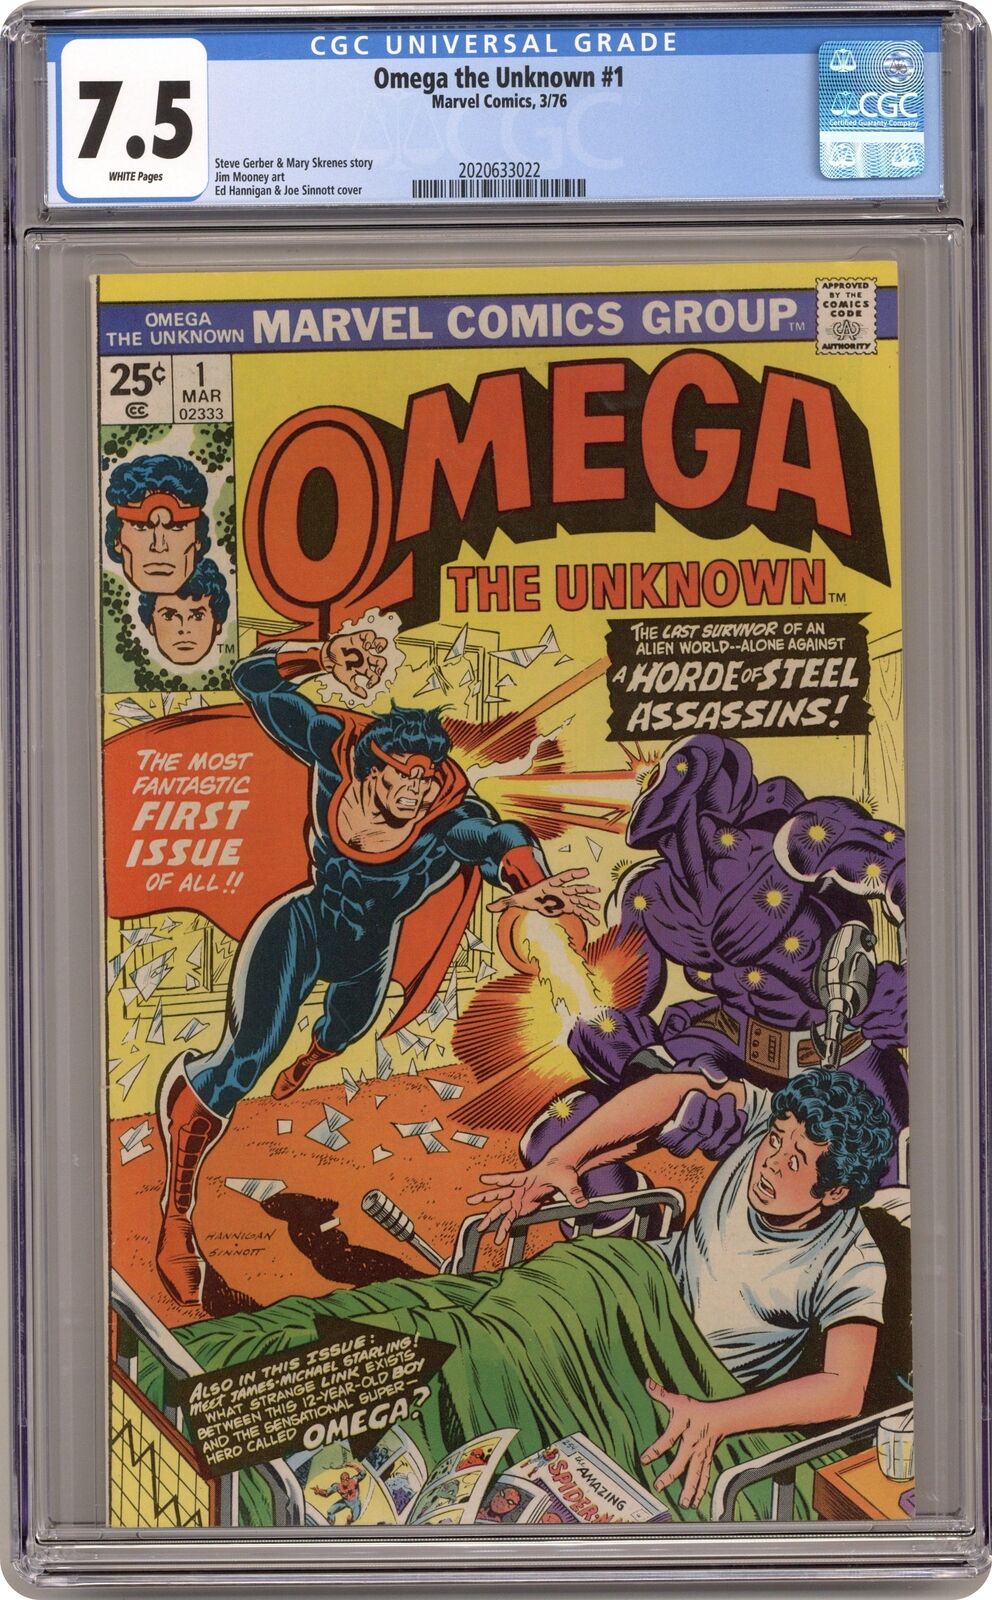 Omega The Unknown #1 CGC 7.5 1976 2020633022